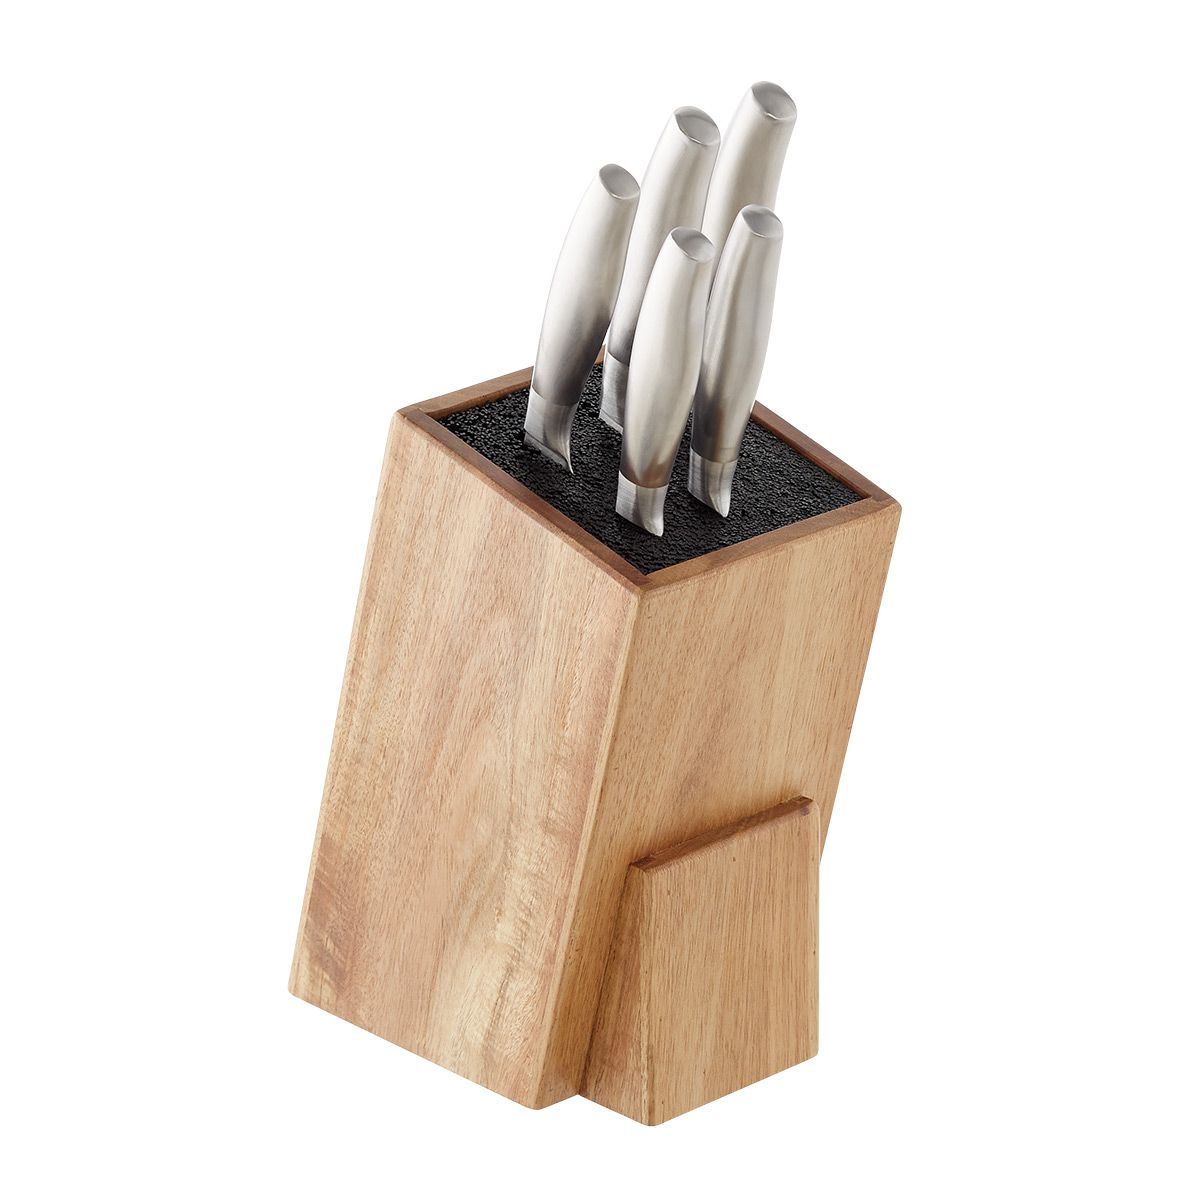 Acacia Universal Knife Storage | The Container Store